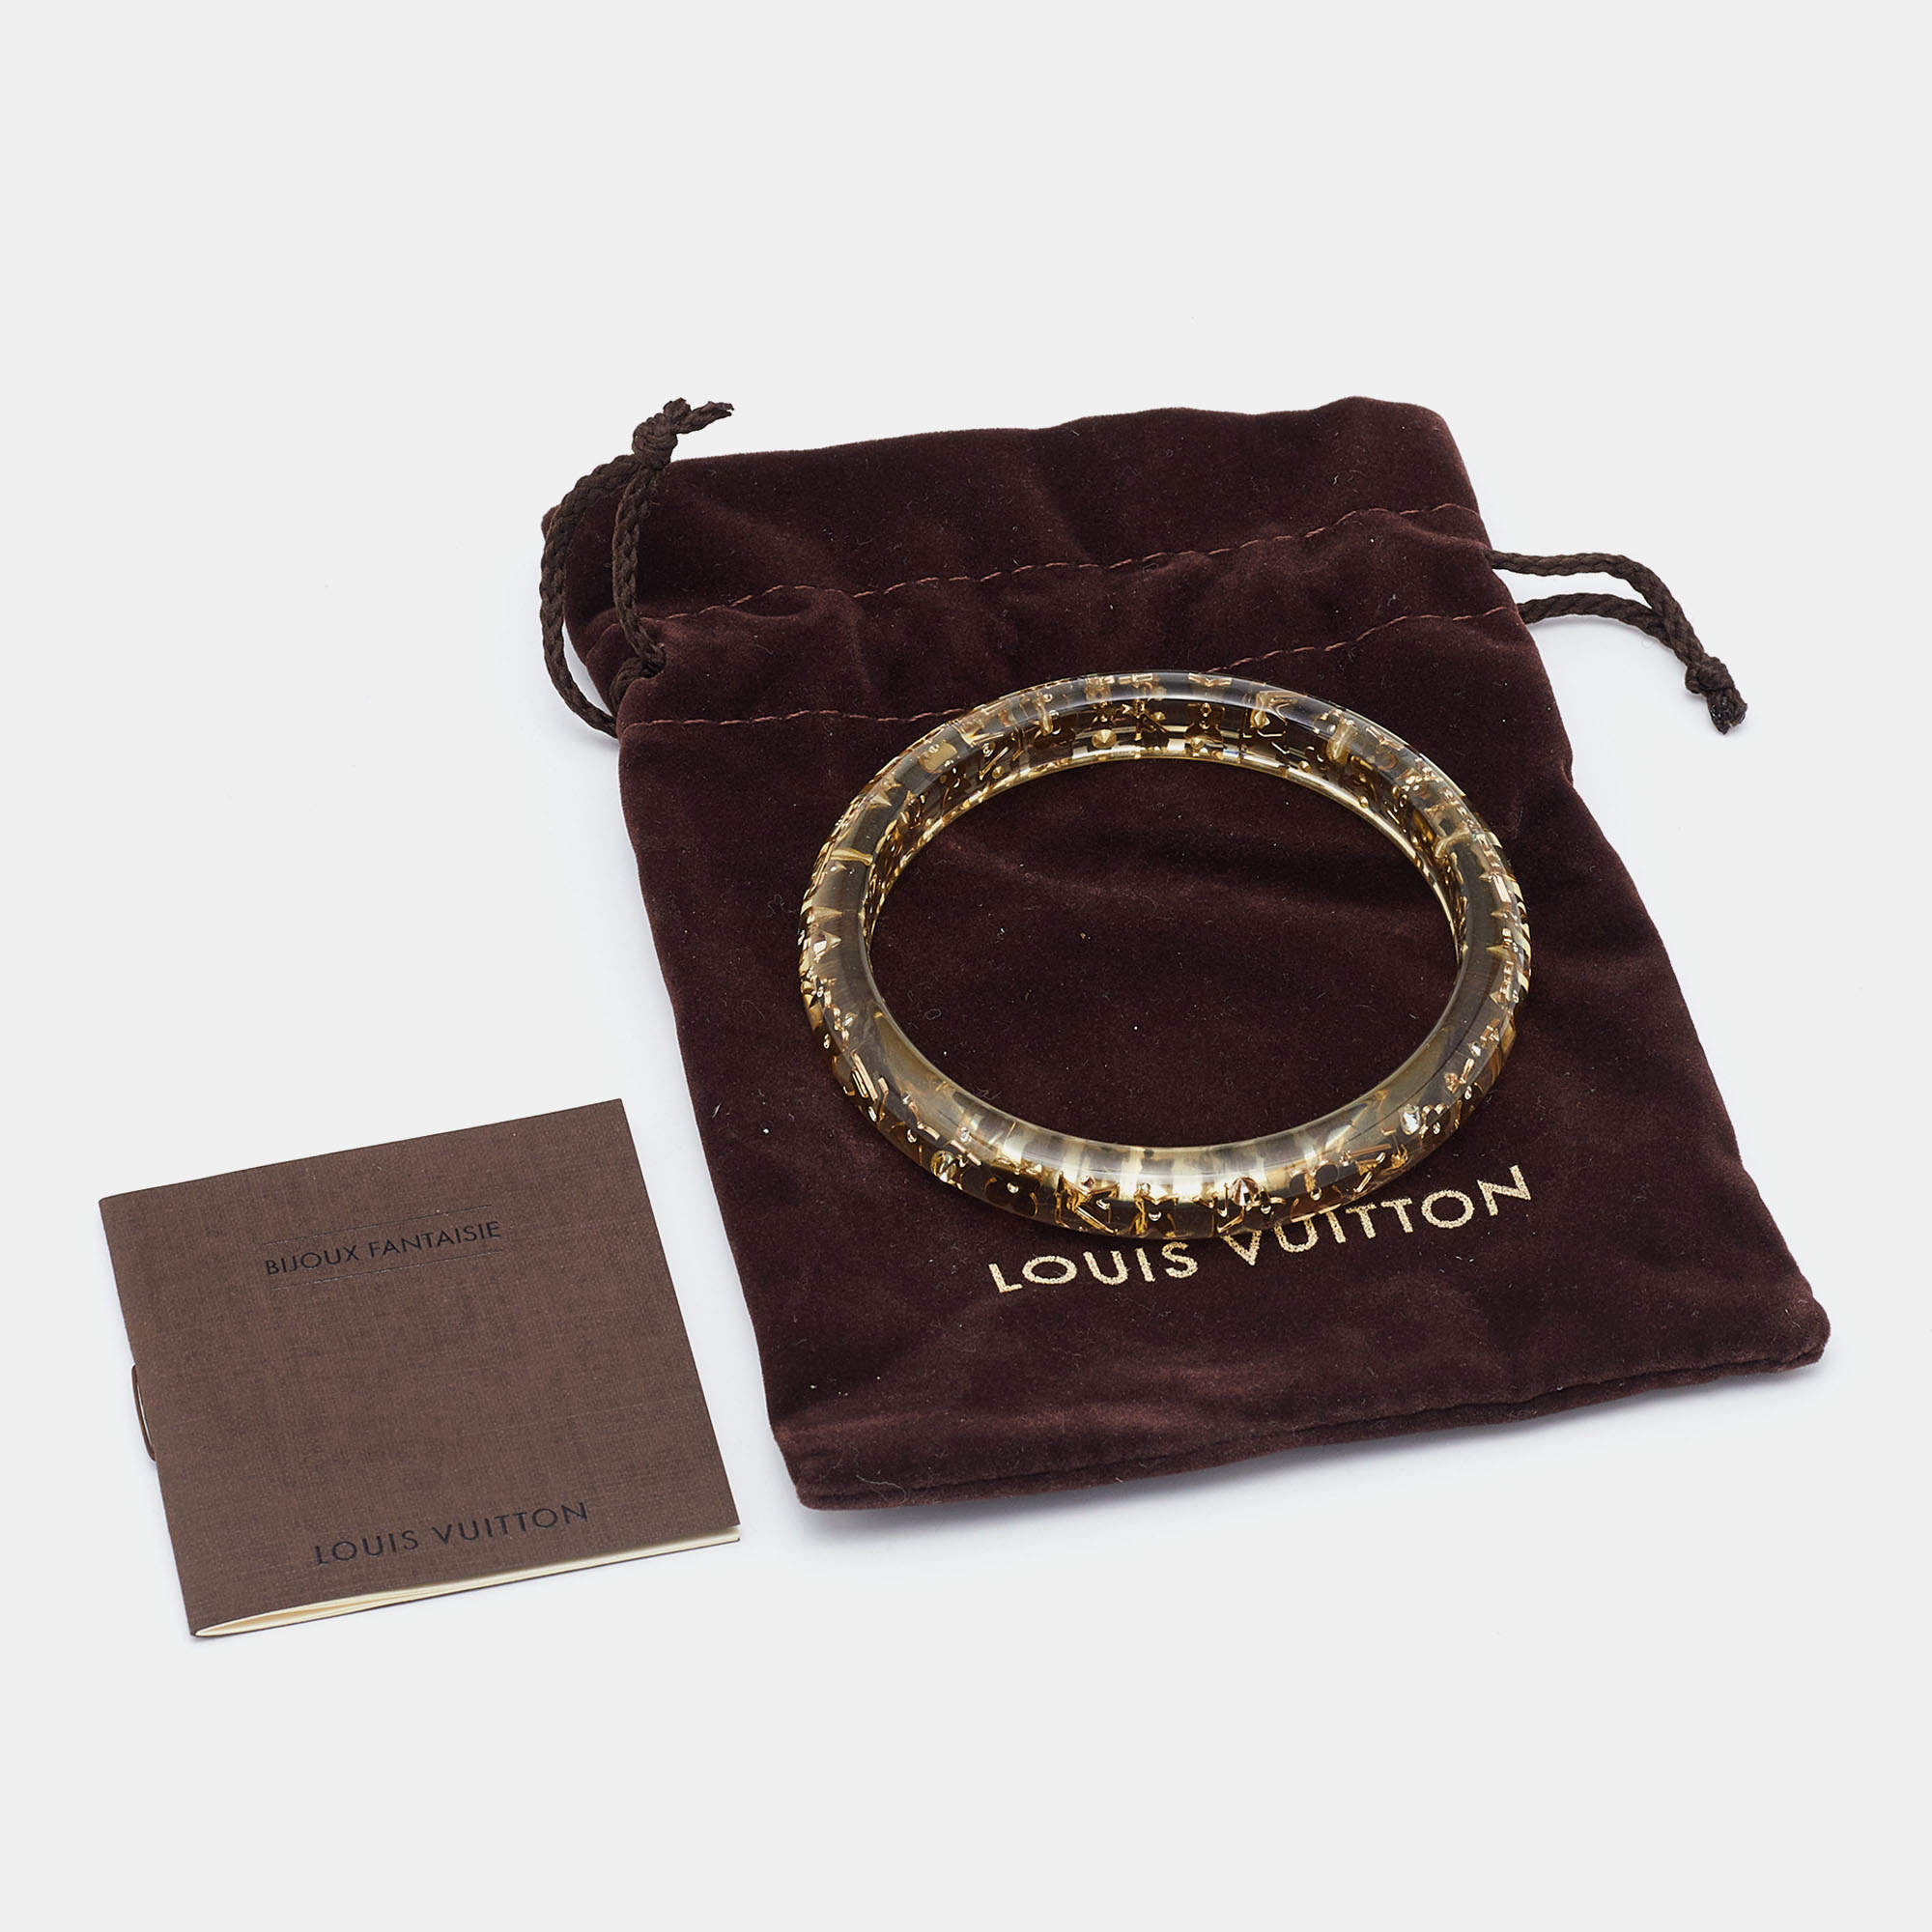 Buy Authentic Pre-owned Louis Vuitton Monogram Inclusion Bracelet Bangle  Clear Beige Gold M65302 230013 from Japan - Buy authentic Plus exclusive  items from Japan